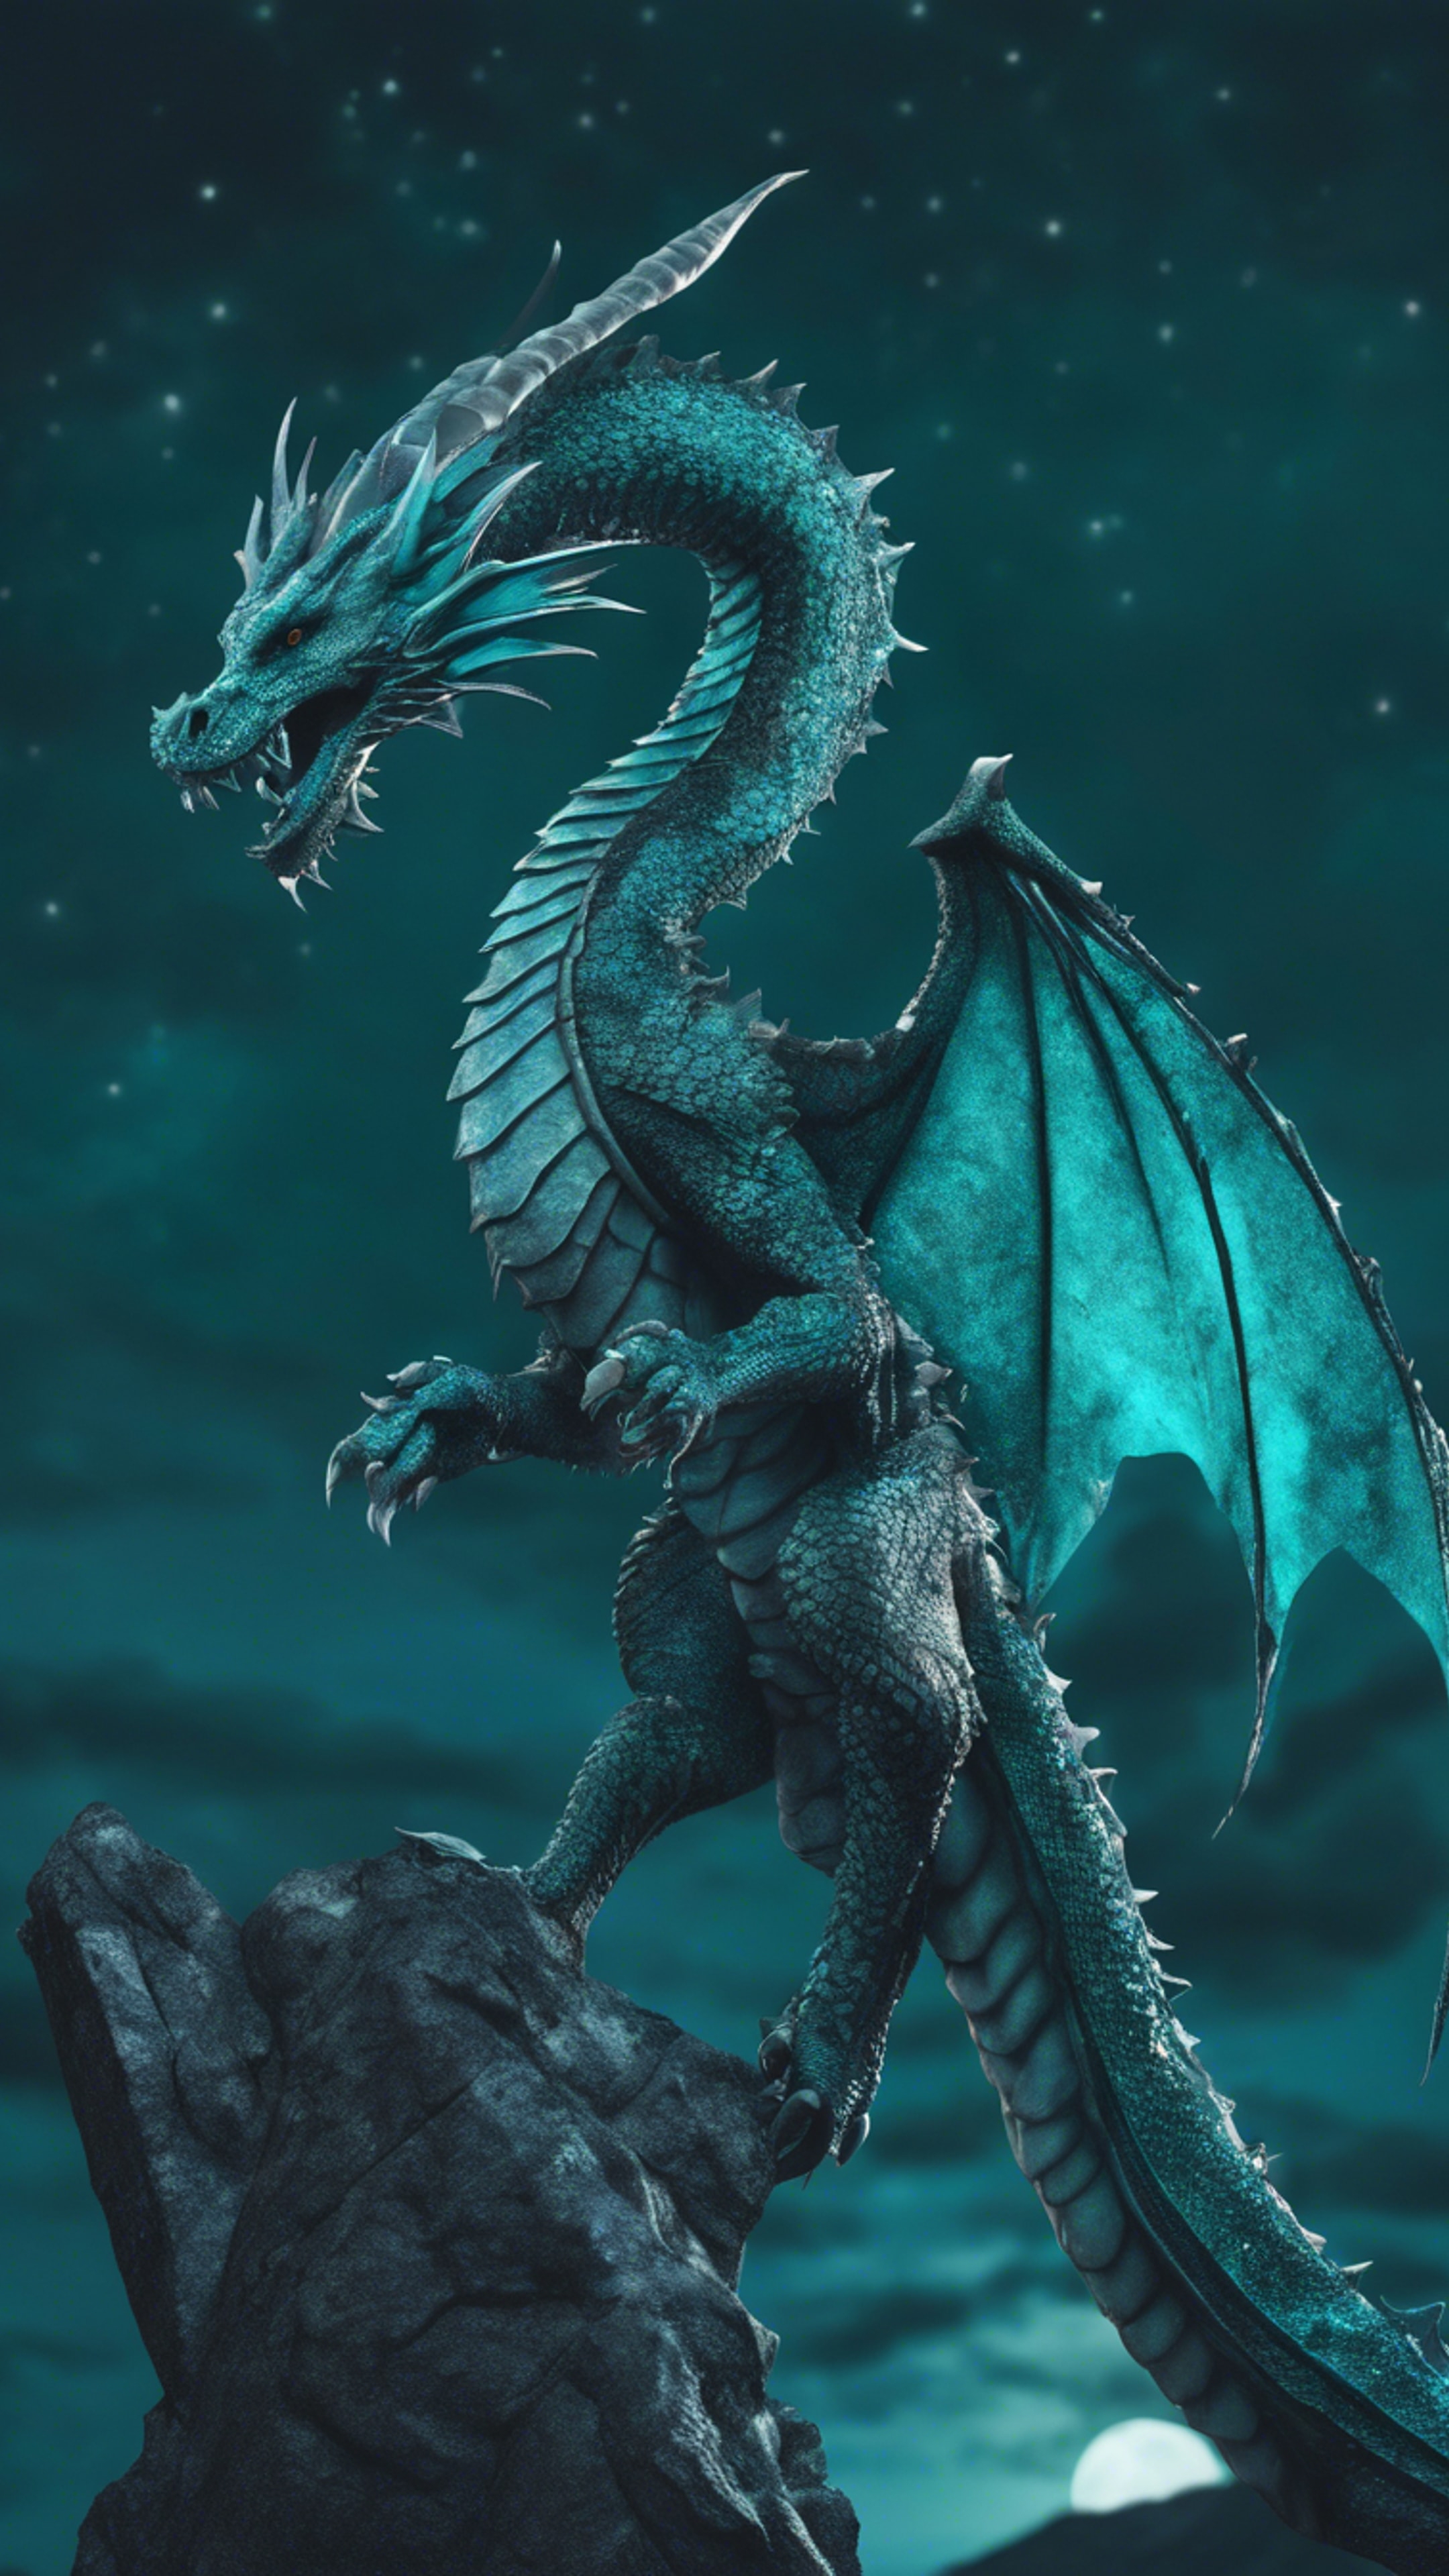 A serpentine Gothic dragon perched on a tall mountain, its teal scales shimmering under the moonlight. duvar kağıdı[91ef634c137e4b1f8ab5]